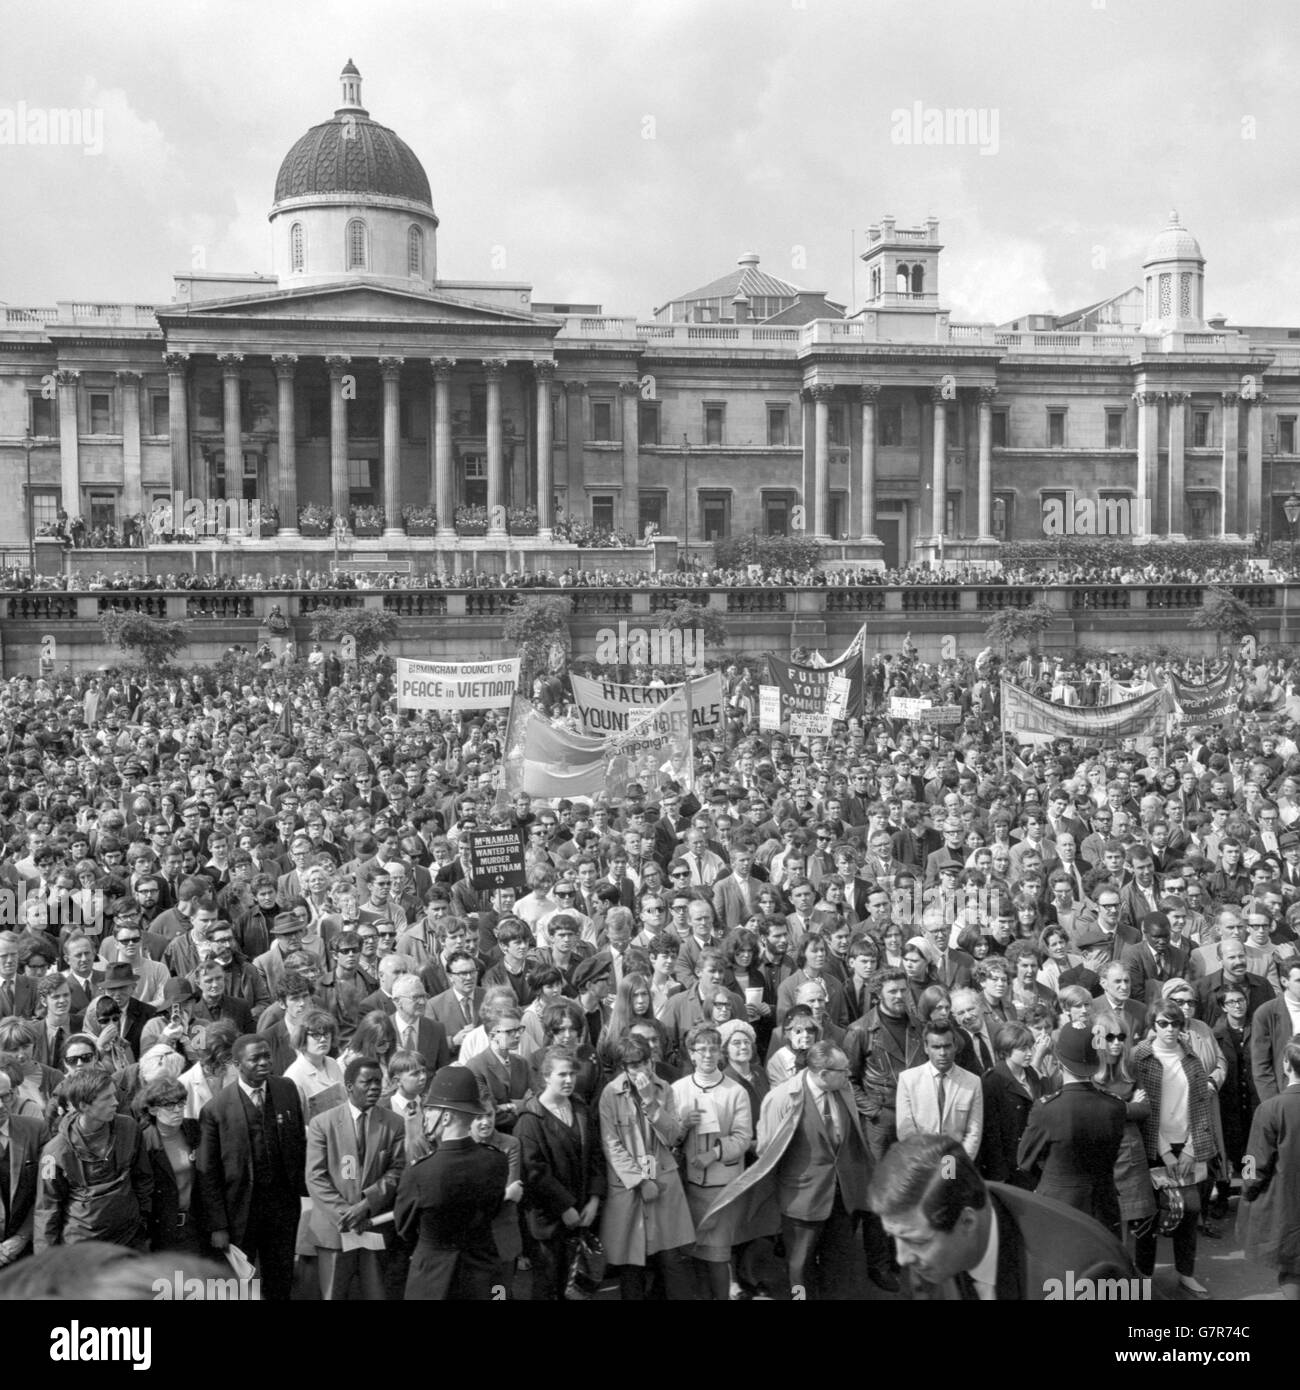 Banners are raised in the sunday sunshine in Trafalgar Square, London, during the protest meeting against the war in Vietnam. The rally was organised by the Campaign for Nuclear Disarmament and called for the dissociation of Britain from American actions in Vietnam. Stock Photo